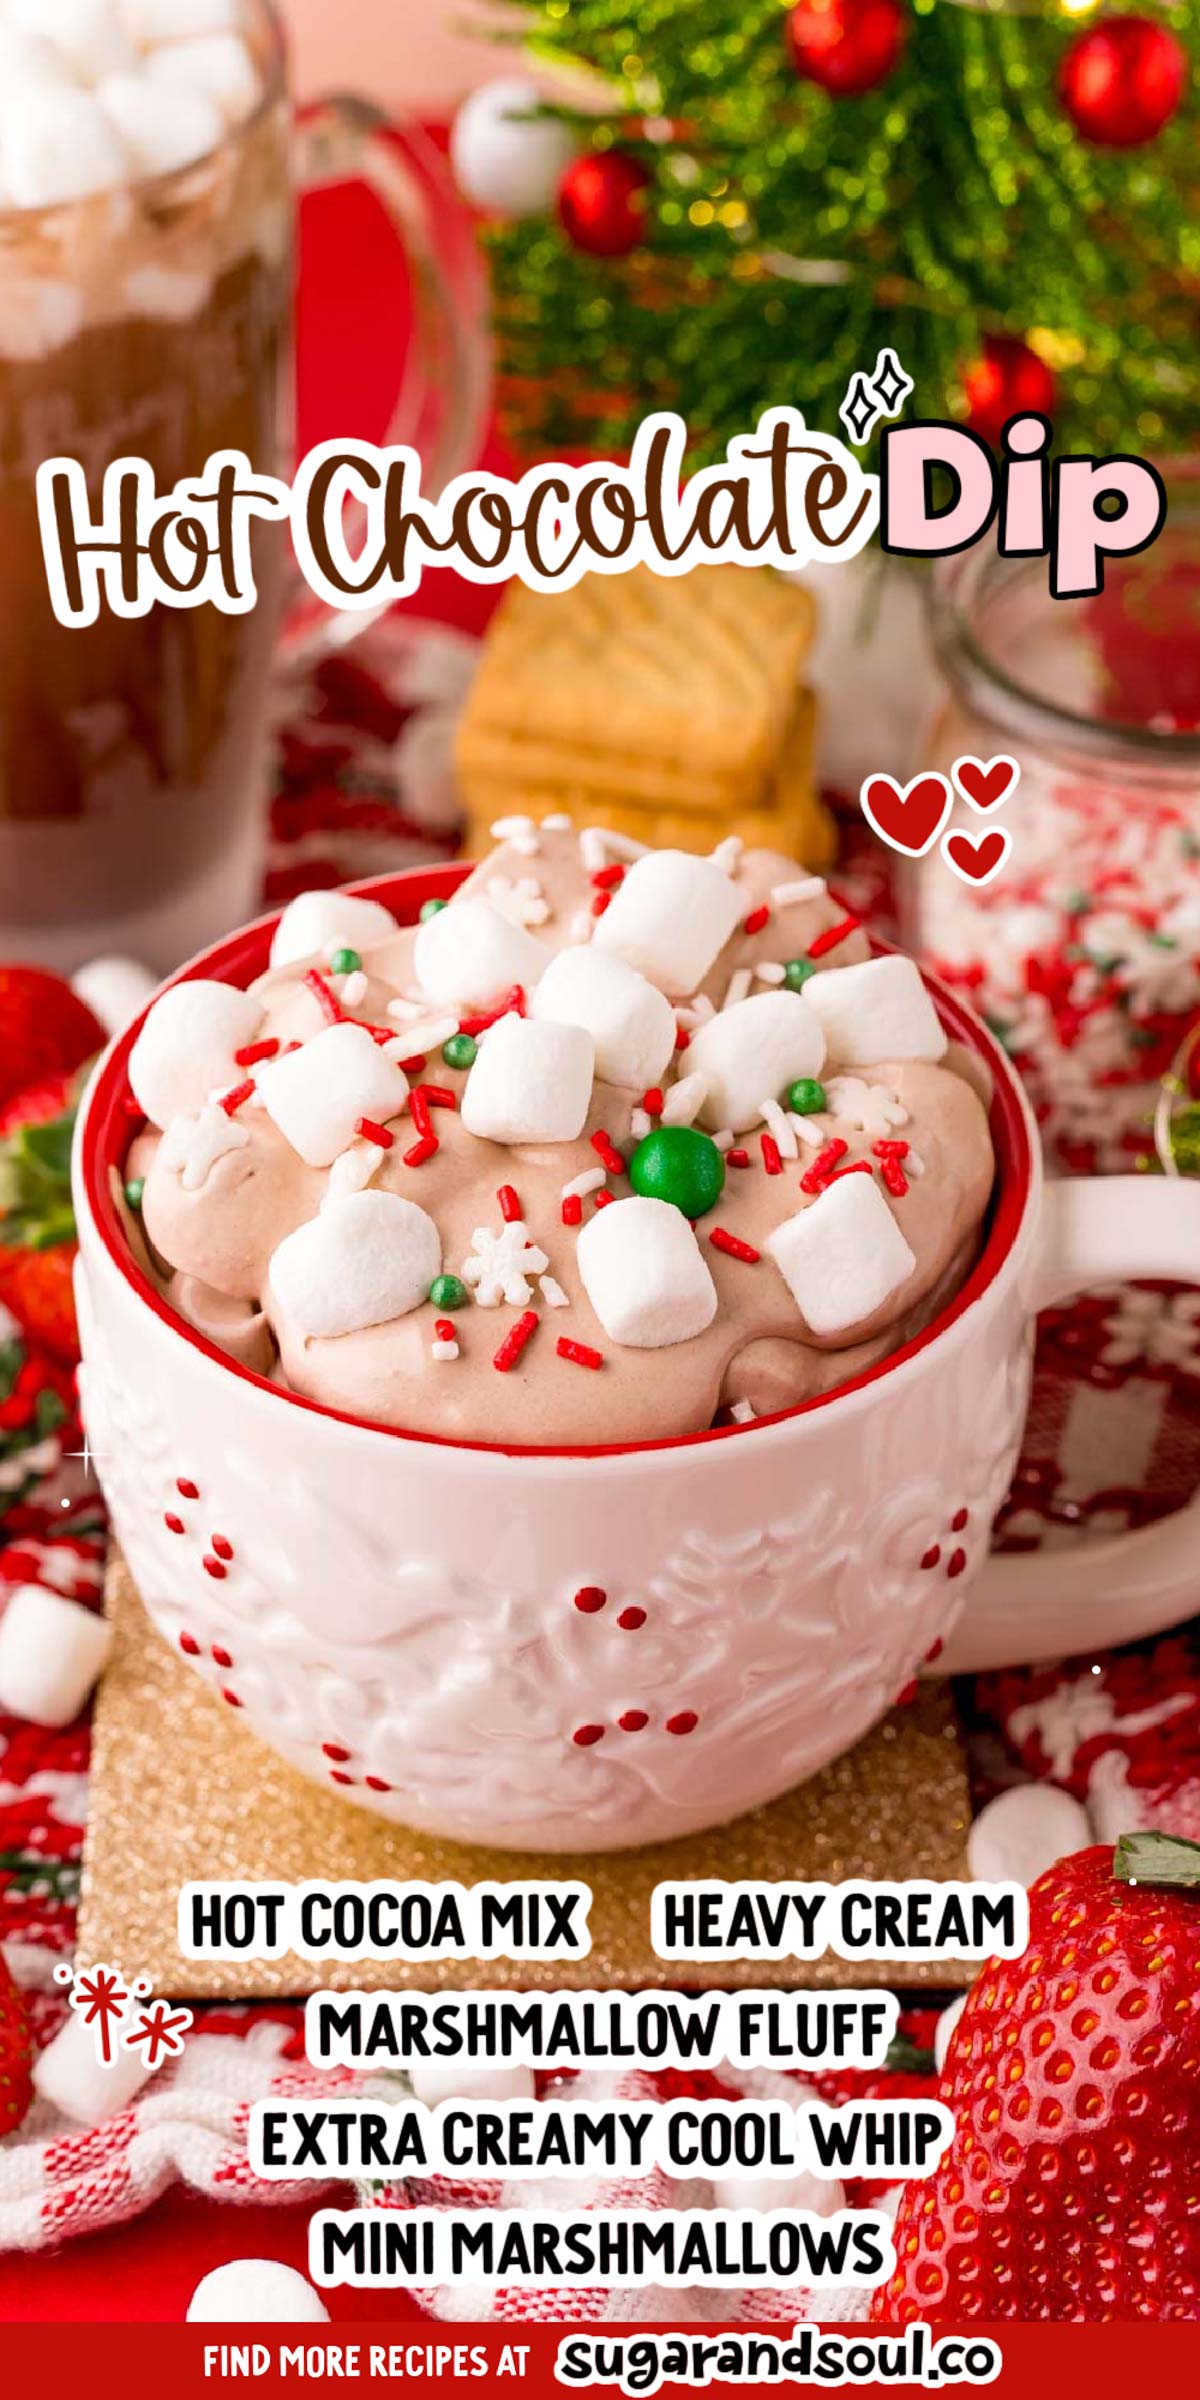 This Hot Chocolate Dip is a deliciously creamy dessert dip that's super easy to make using your favorite powdered hot cocoa mix! Enjoy this treat by dipping cookies and fresh fruit into it! via @sugarandsoulco